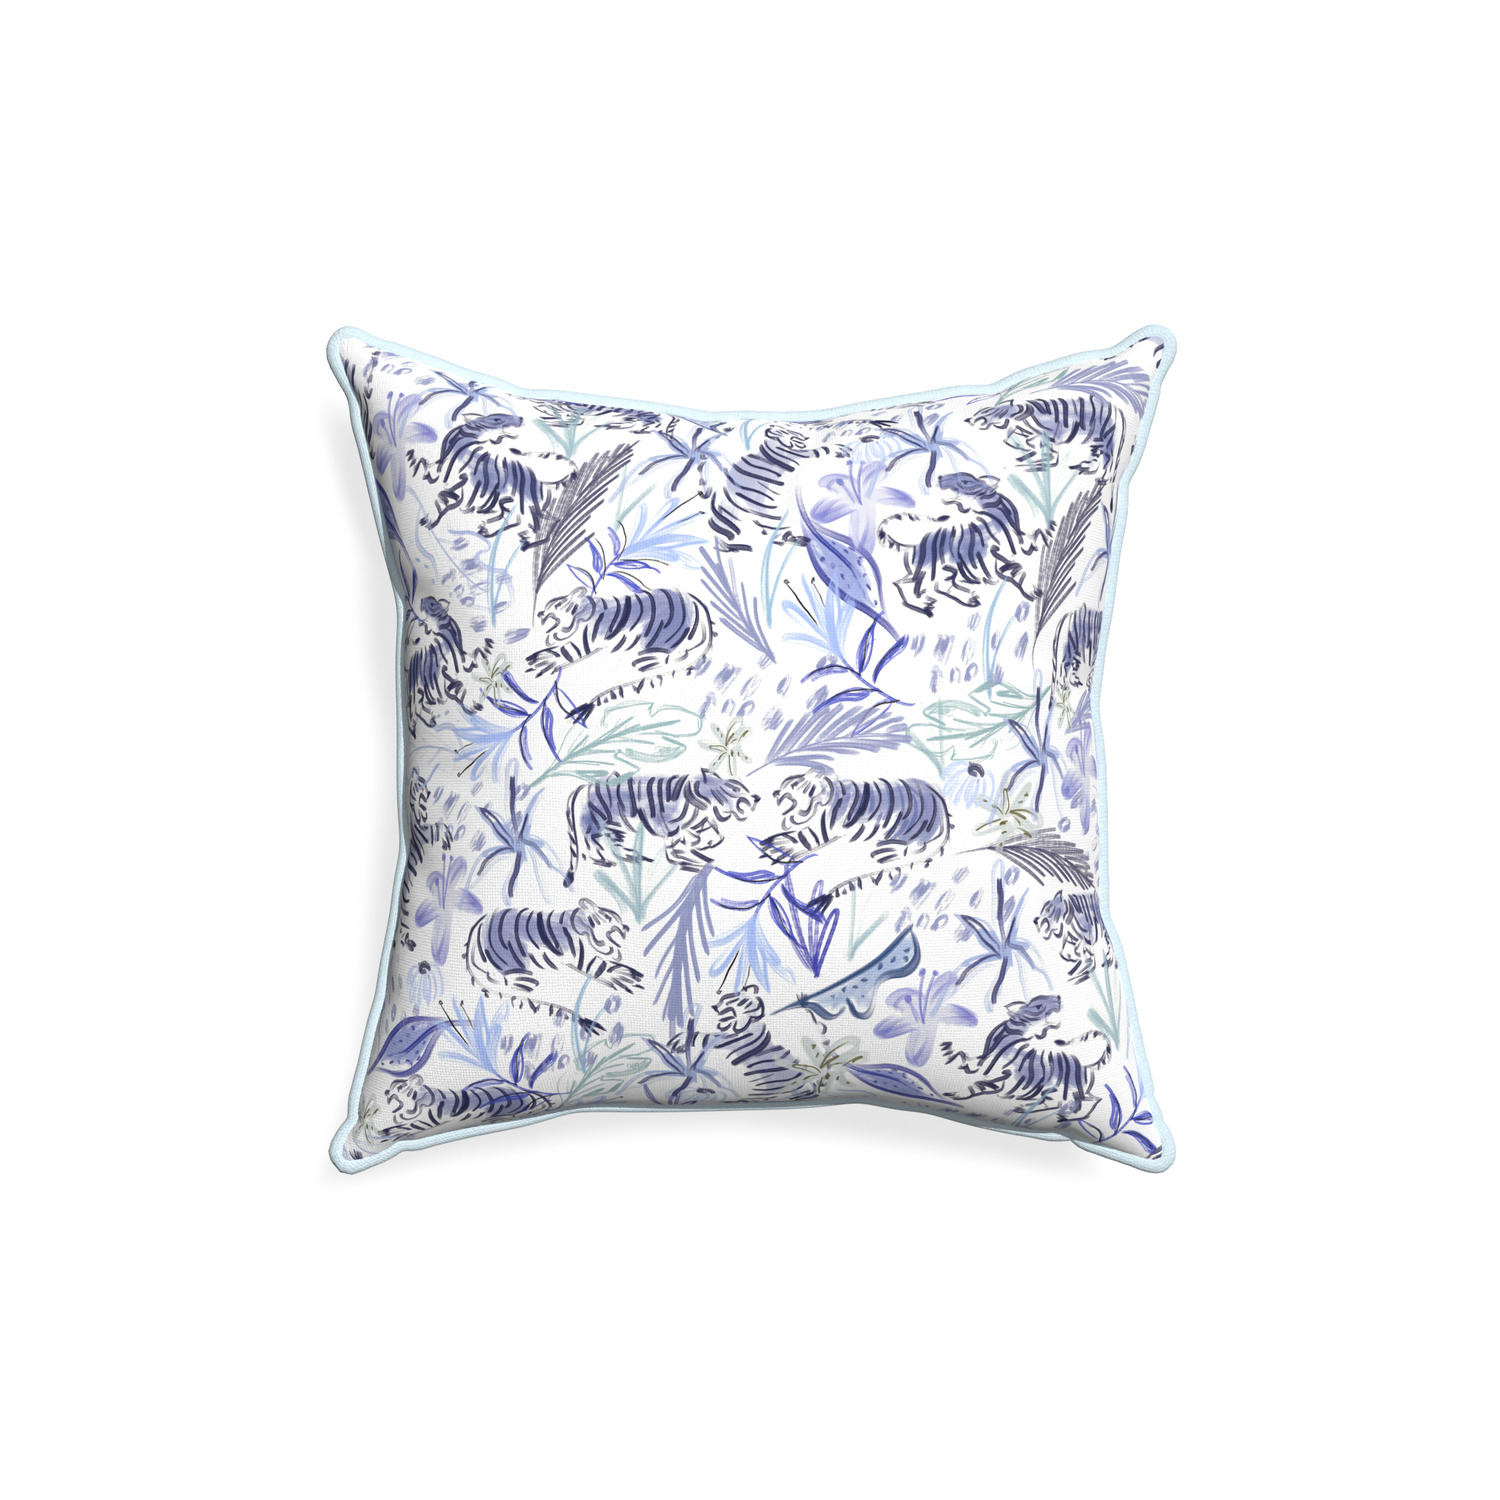 18-square frida blue custom blue with intricate tiger designpillow with powder piping on white background